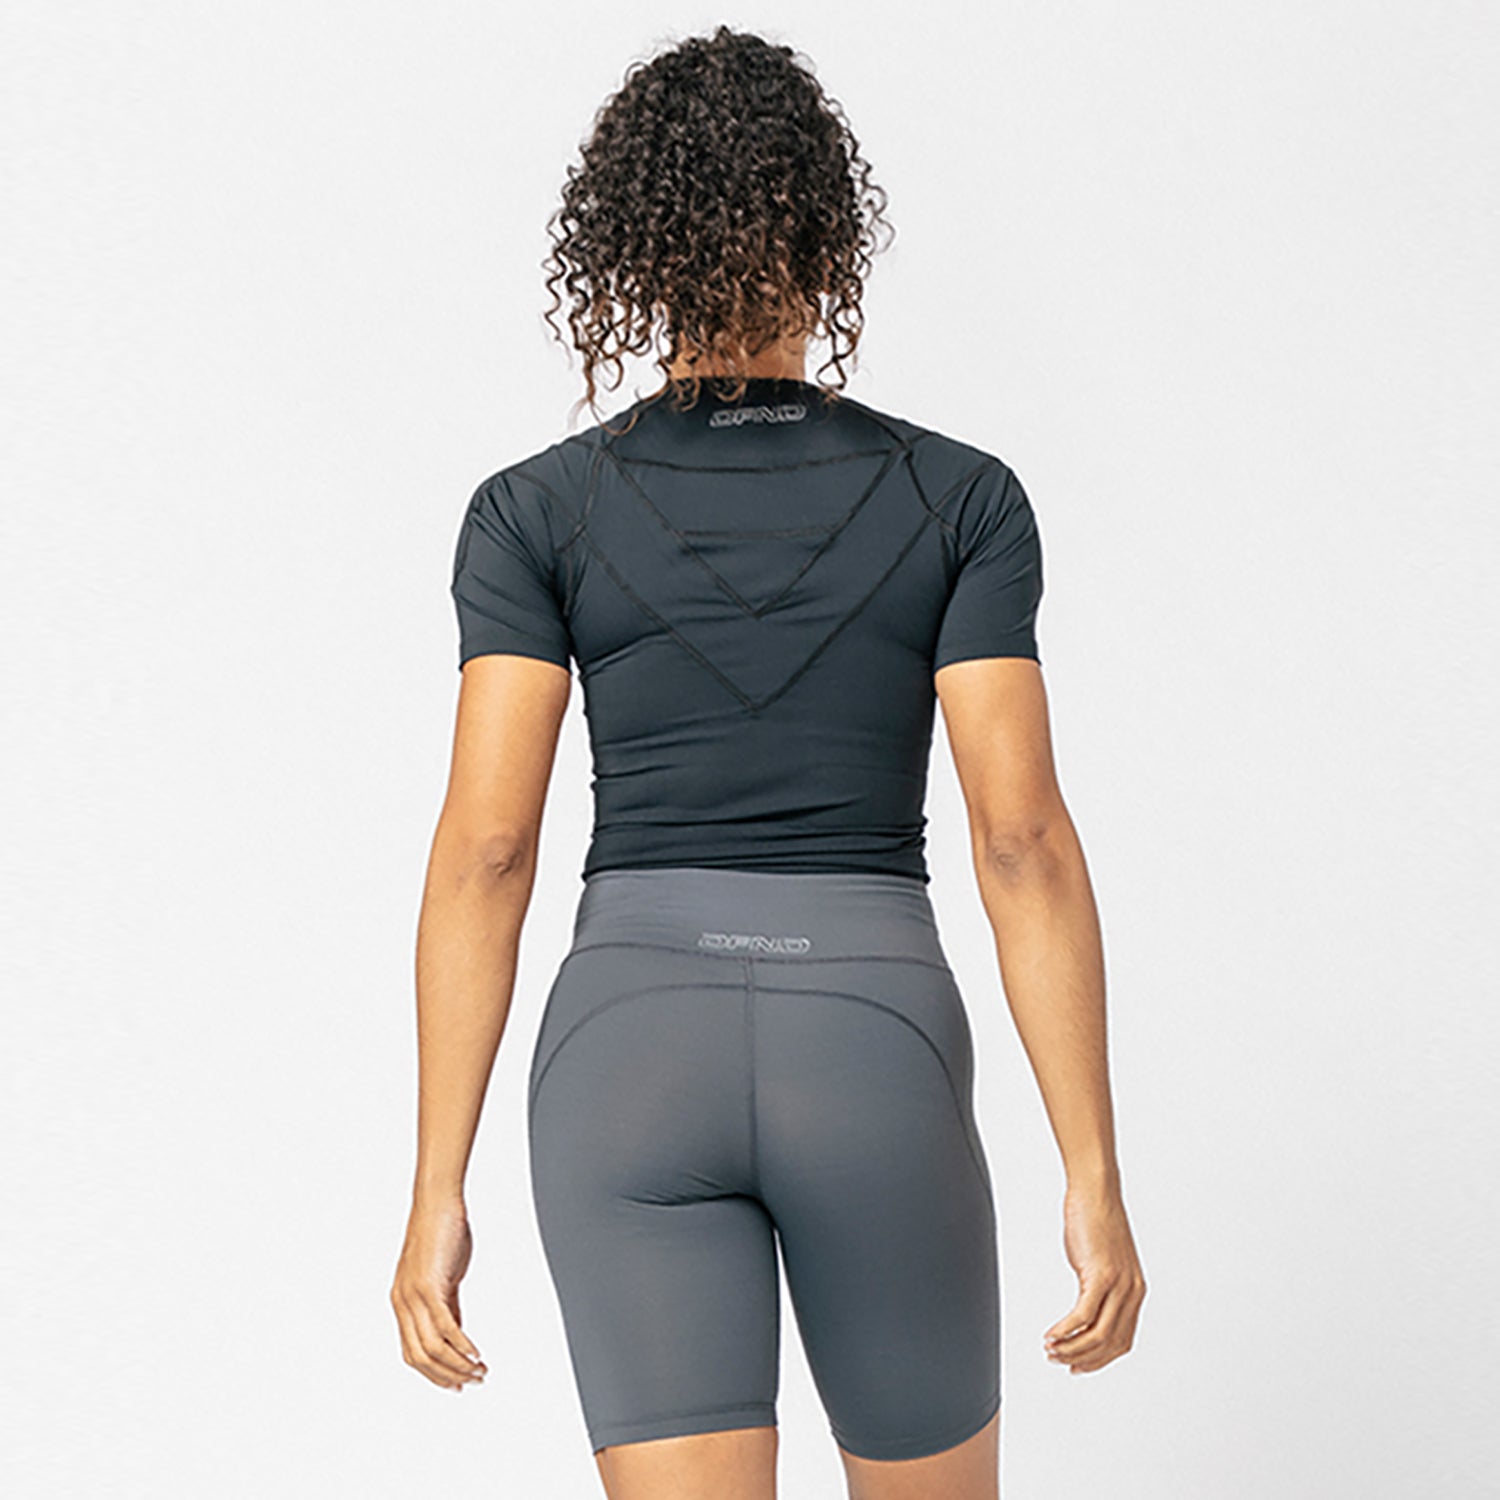 Long Sleeve Improved Posture Compression Shirts for Men and Women